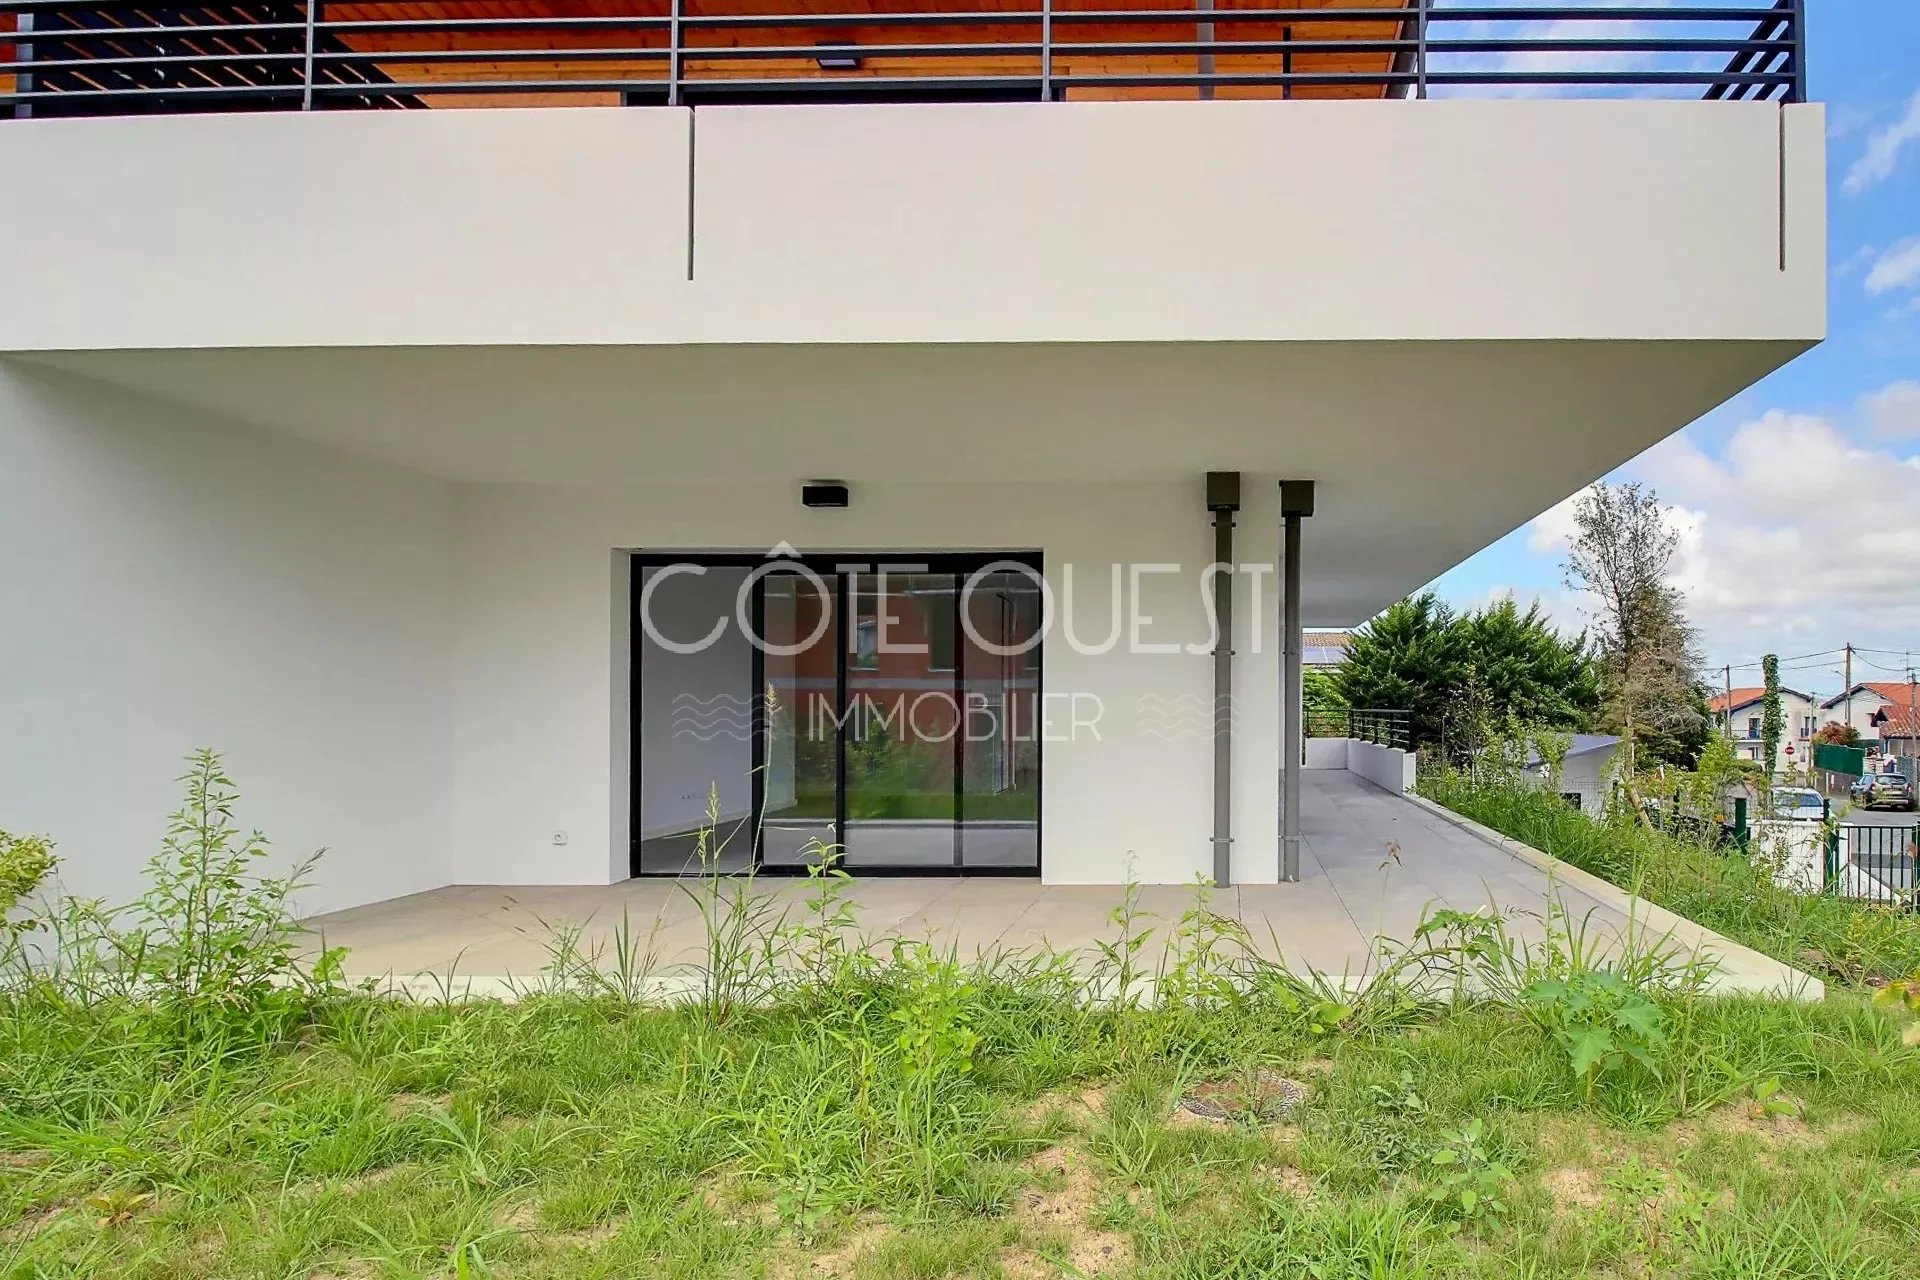 ANGLET 5 CANTONS – A BRAND-NEW APARTMENT